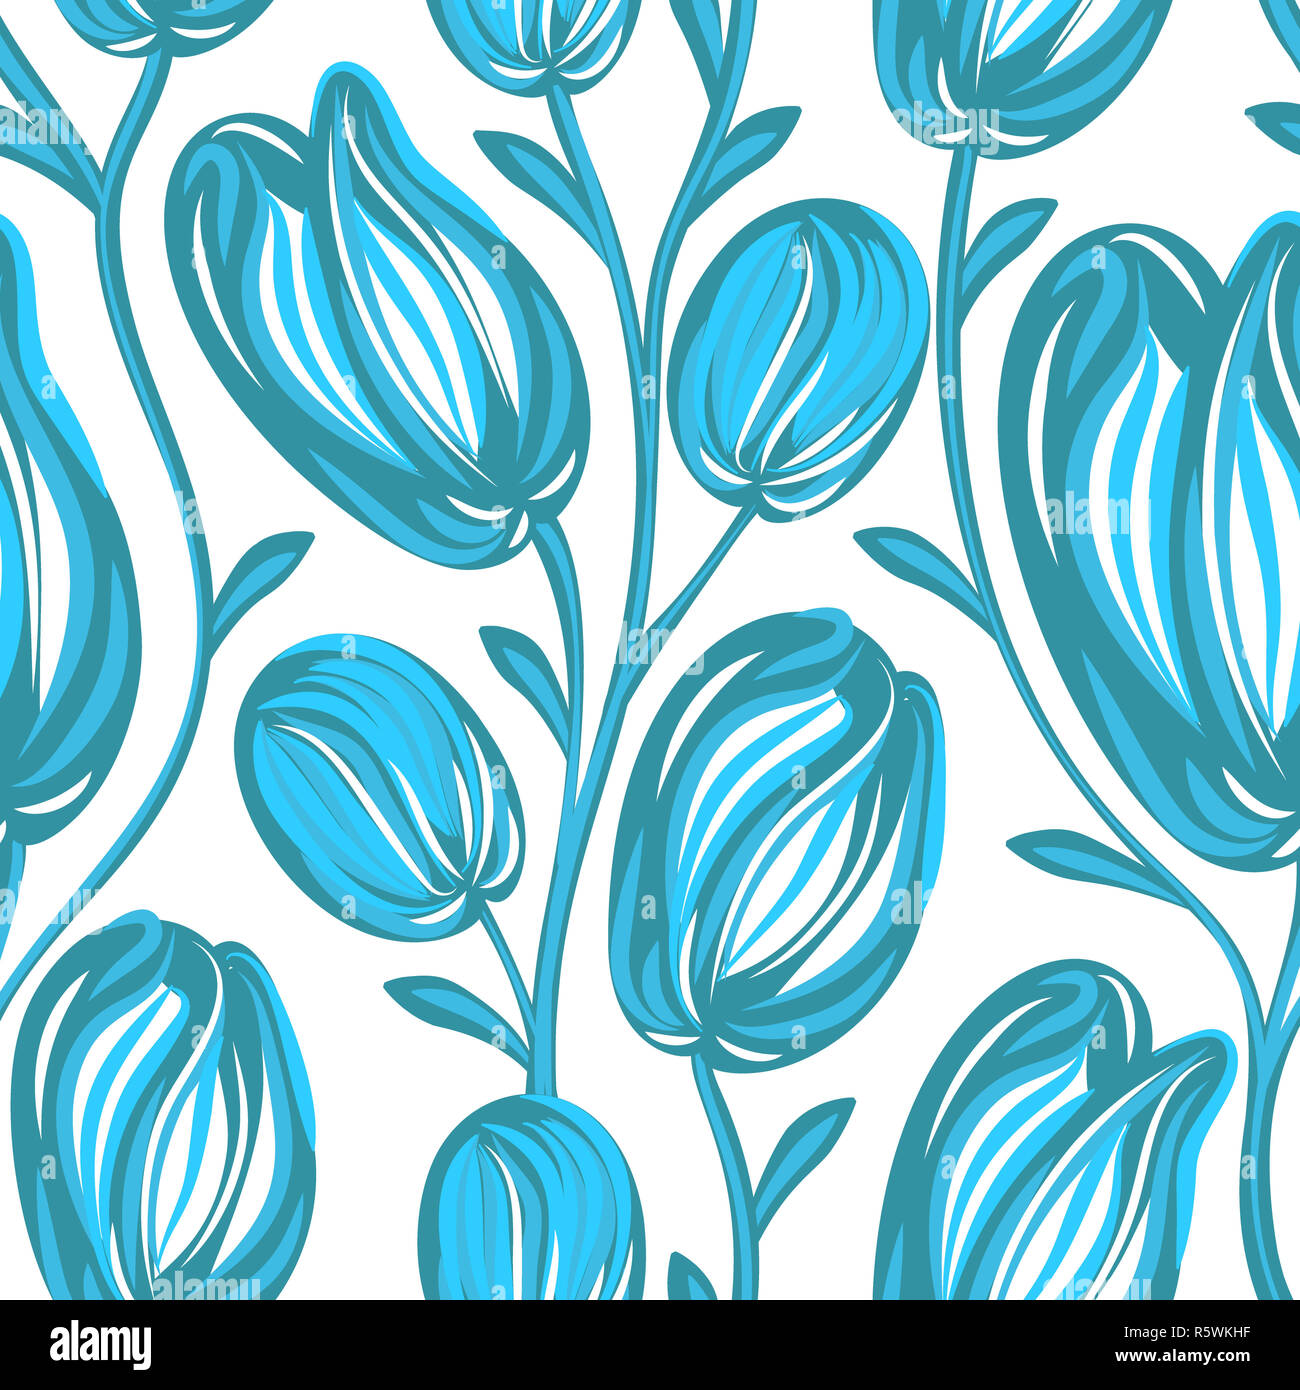 Floral seamless pattern. Hand drawn creative flowers. Colorful artistic background. Abstract herb Stock Photo